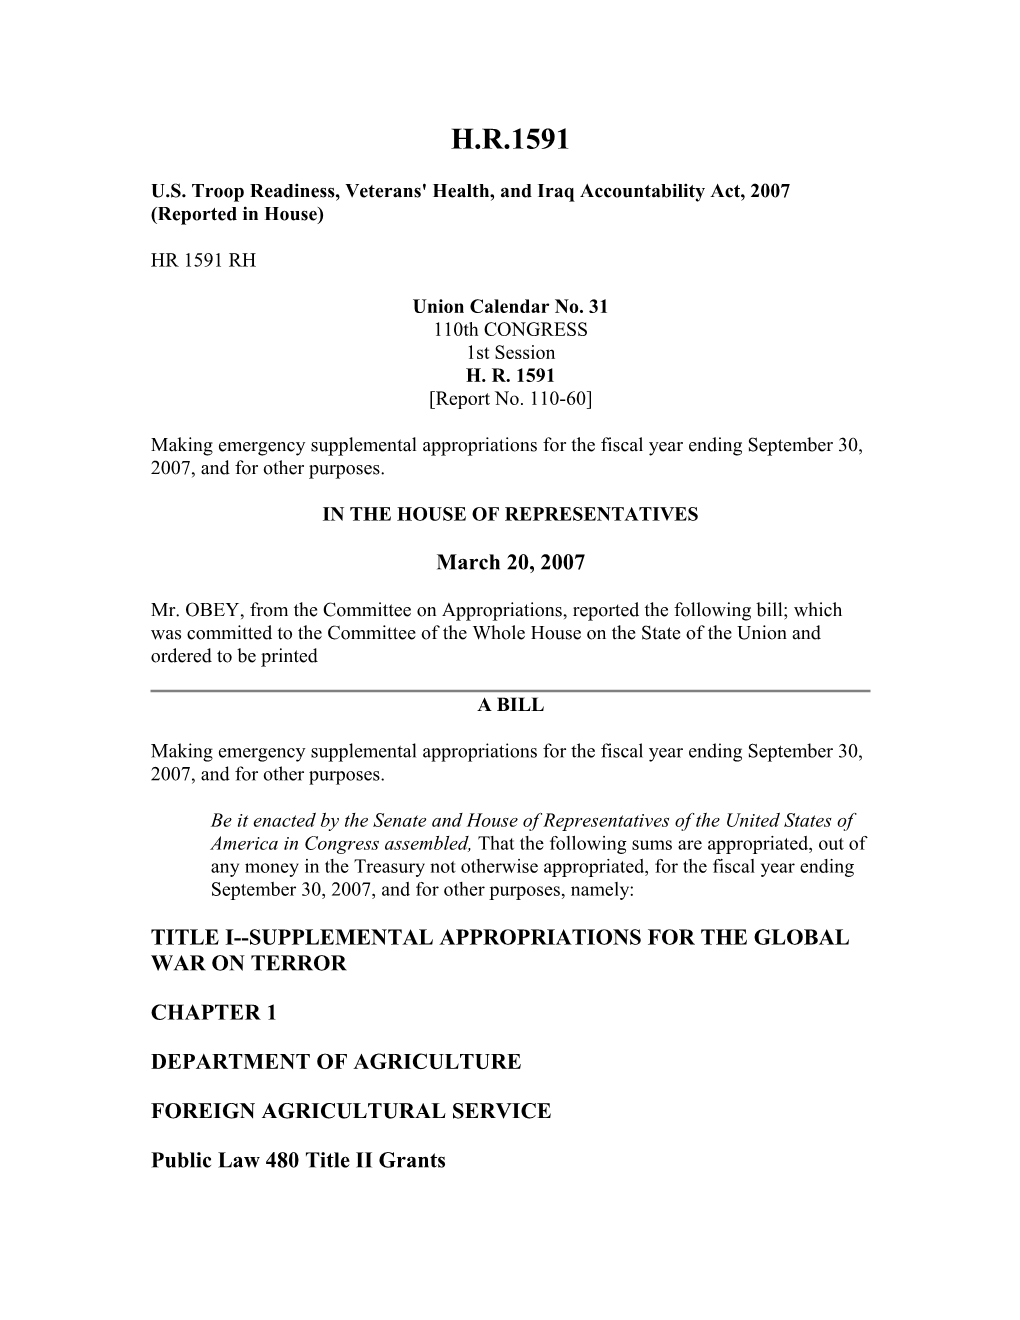 U.S. Troop Readiness, Veterans' Health, and Iraq Accountability Act, 2007 (Reported in House)